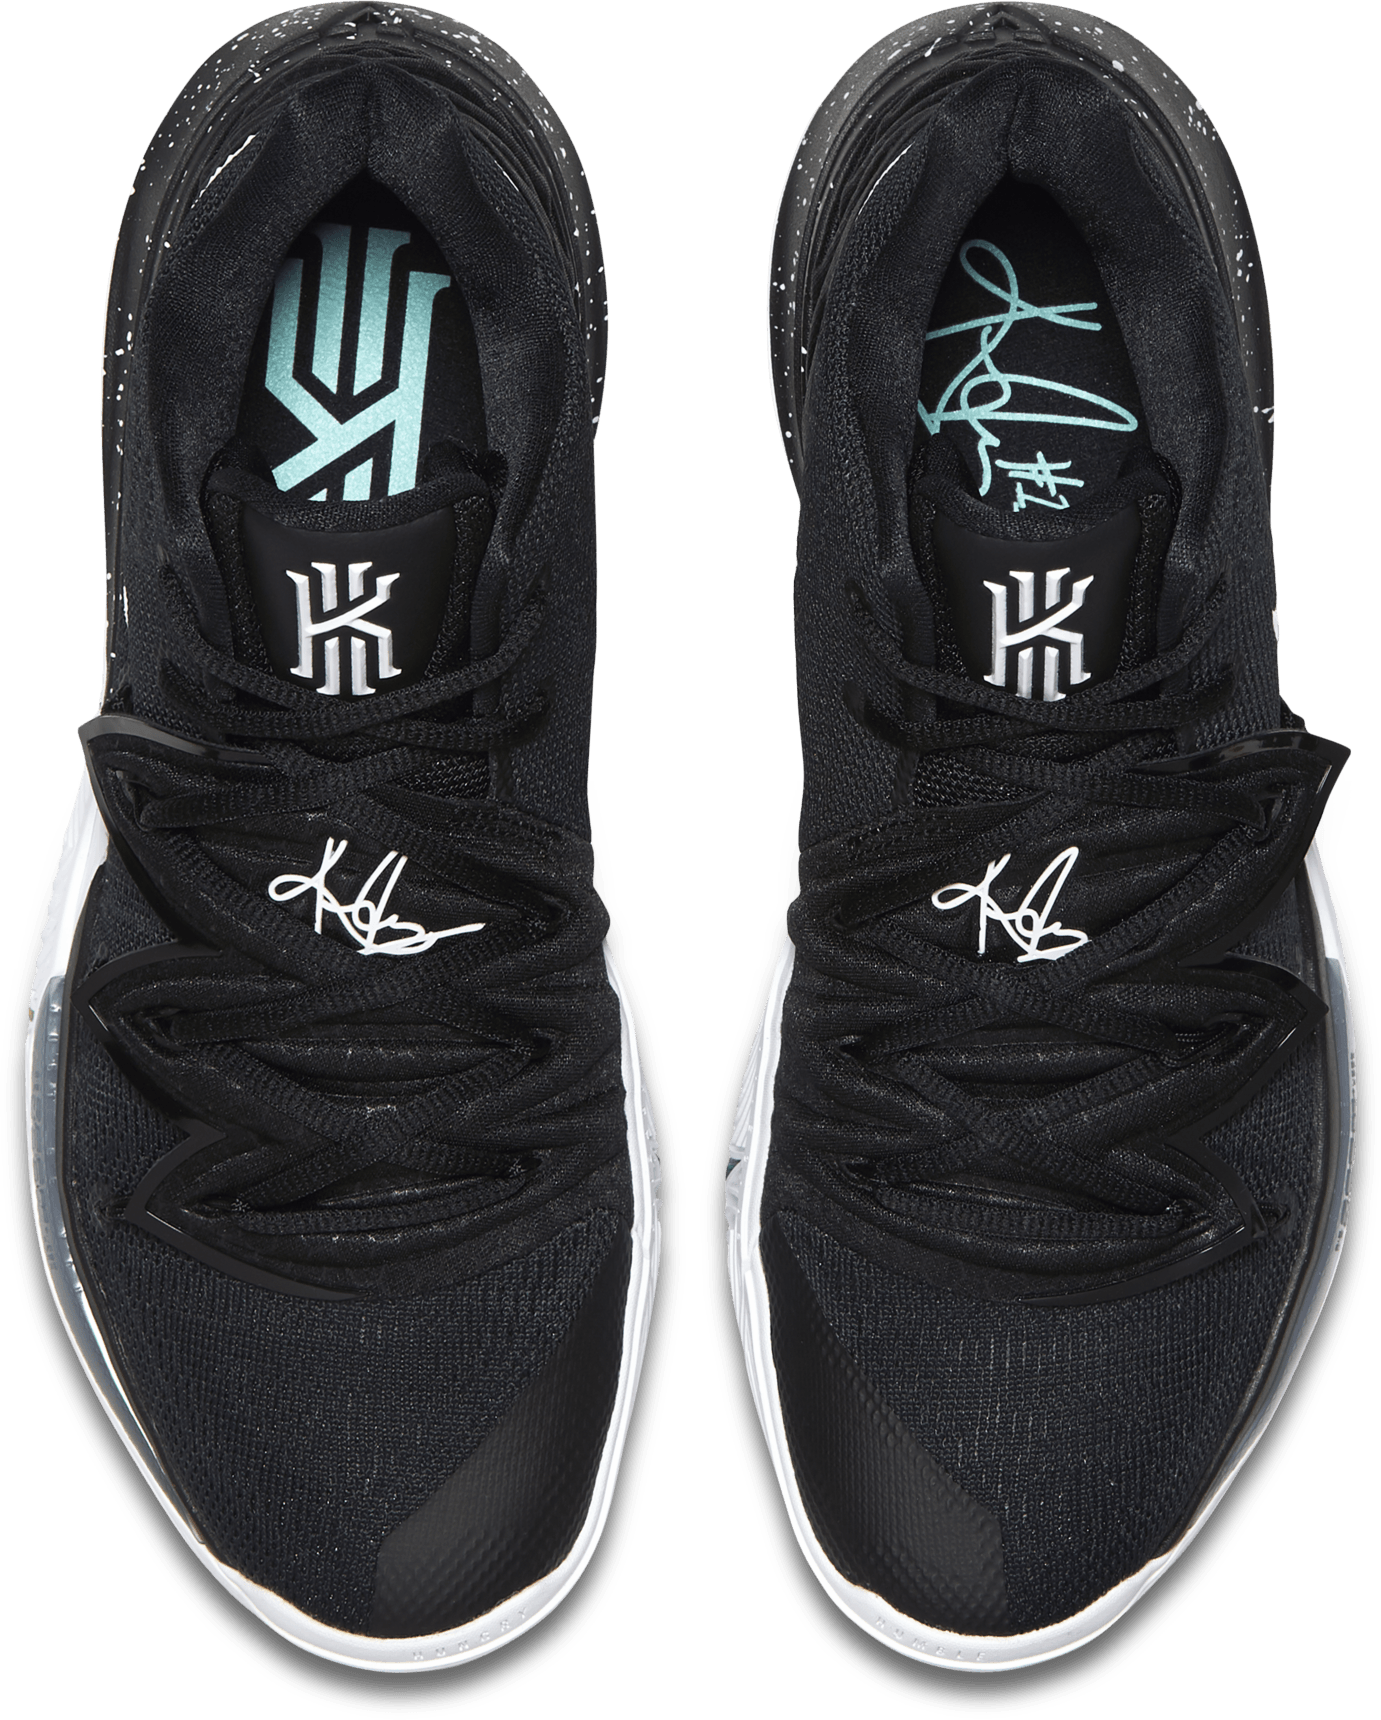 kyrie 5 insole